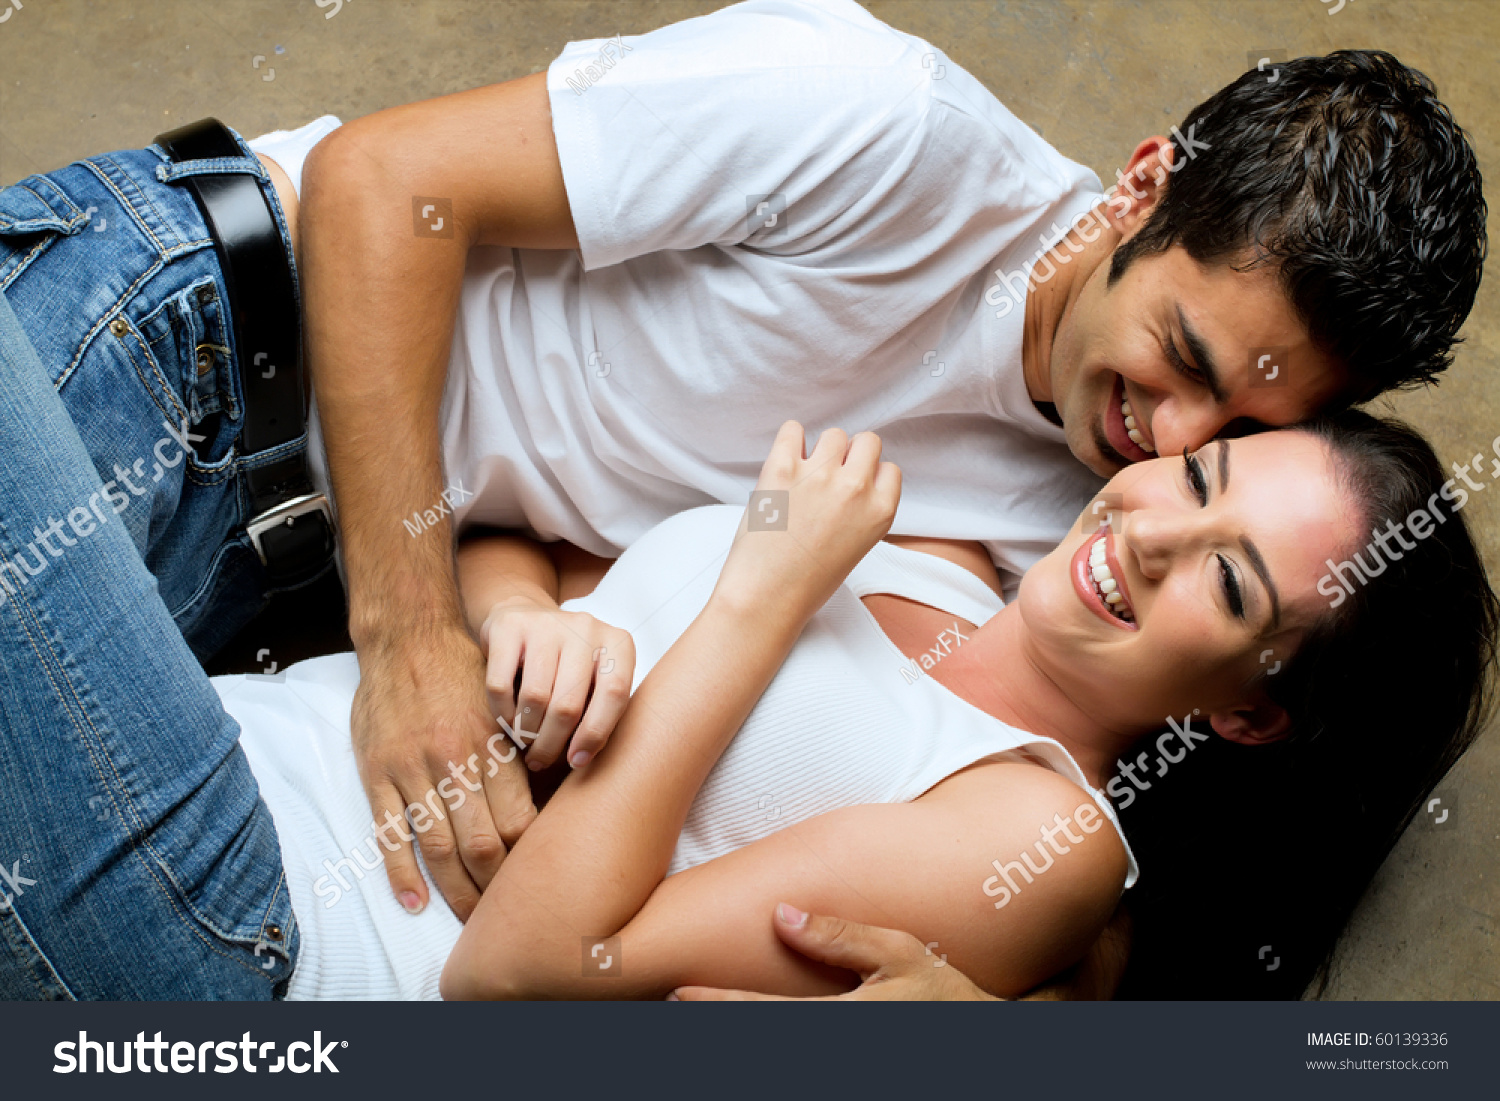 Young Couple Sharing A Romantic Moment Stock Photo 60139336